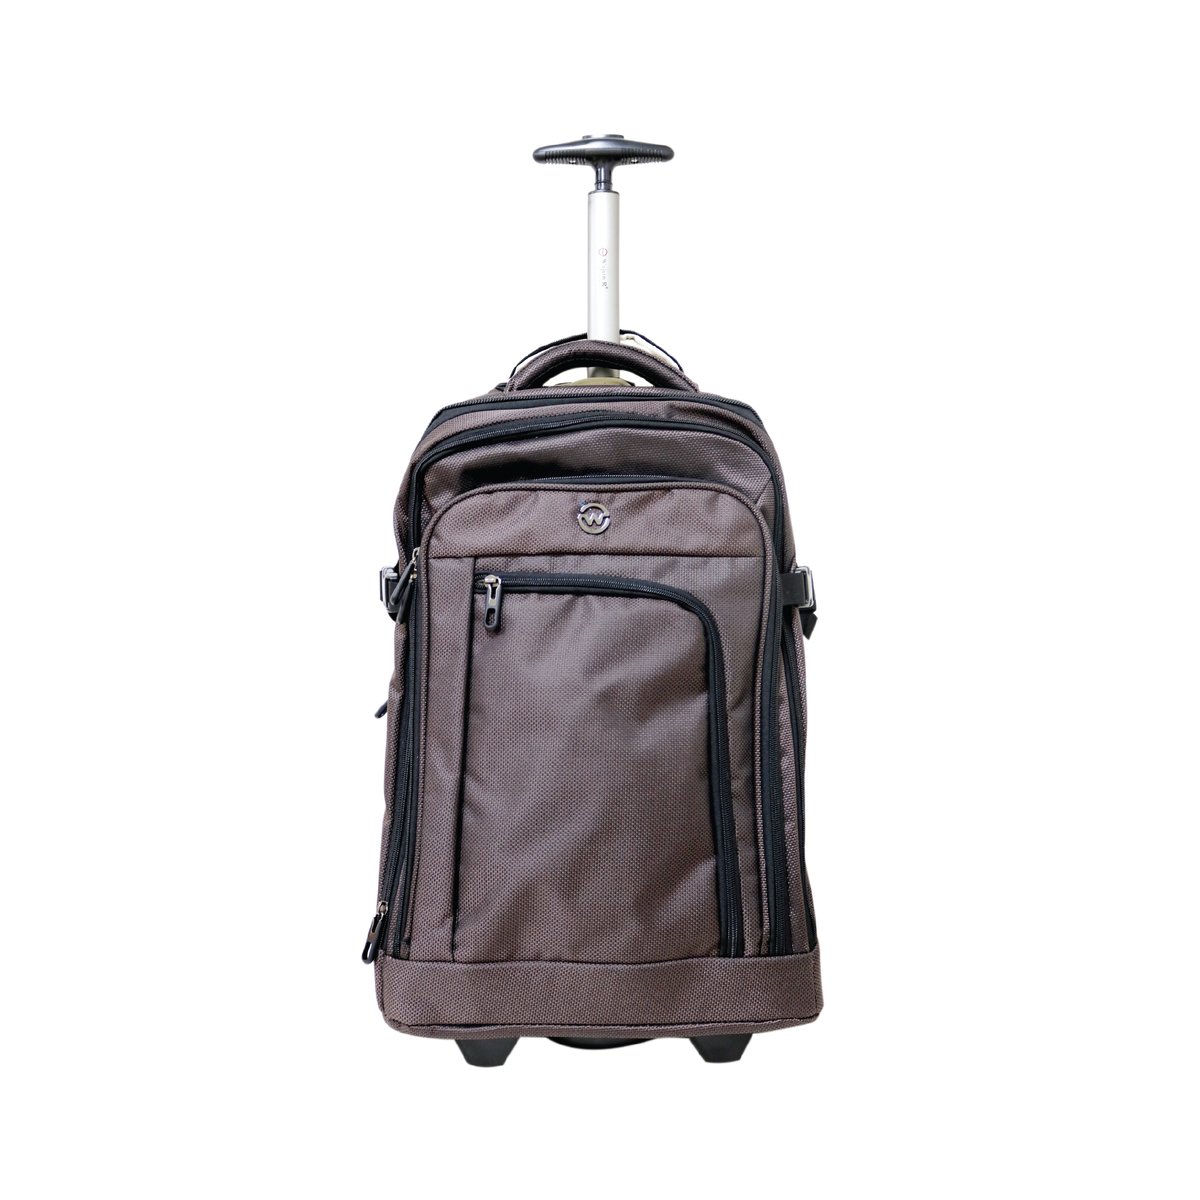 Wagon-R Back Pack Trolley 7902 20In